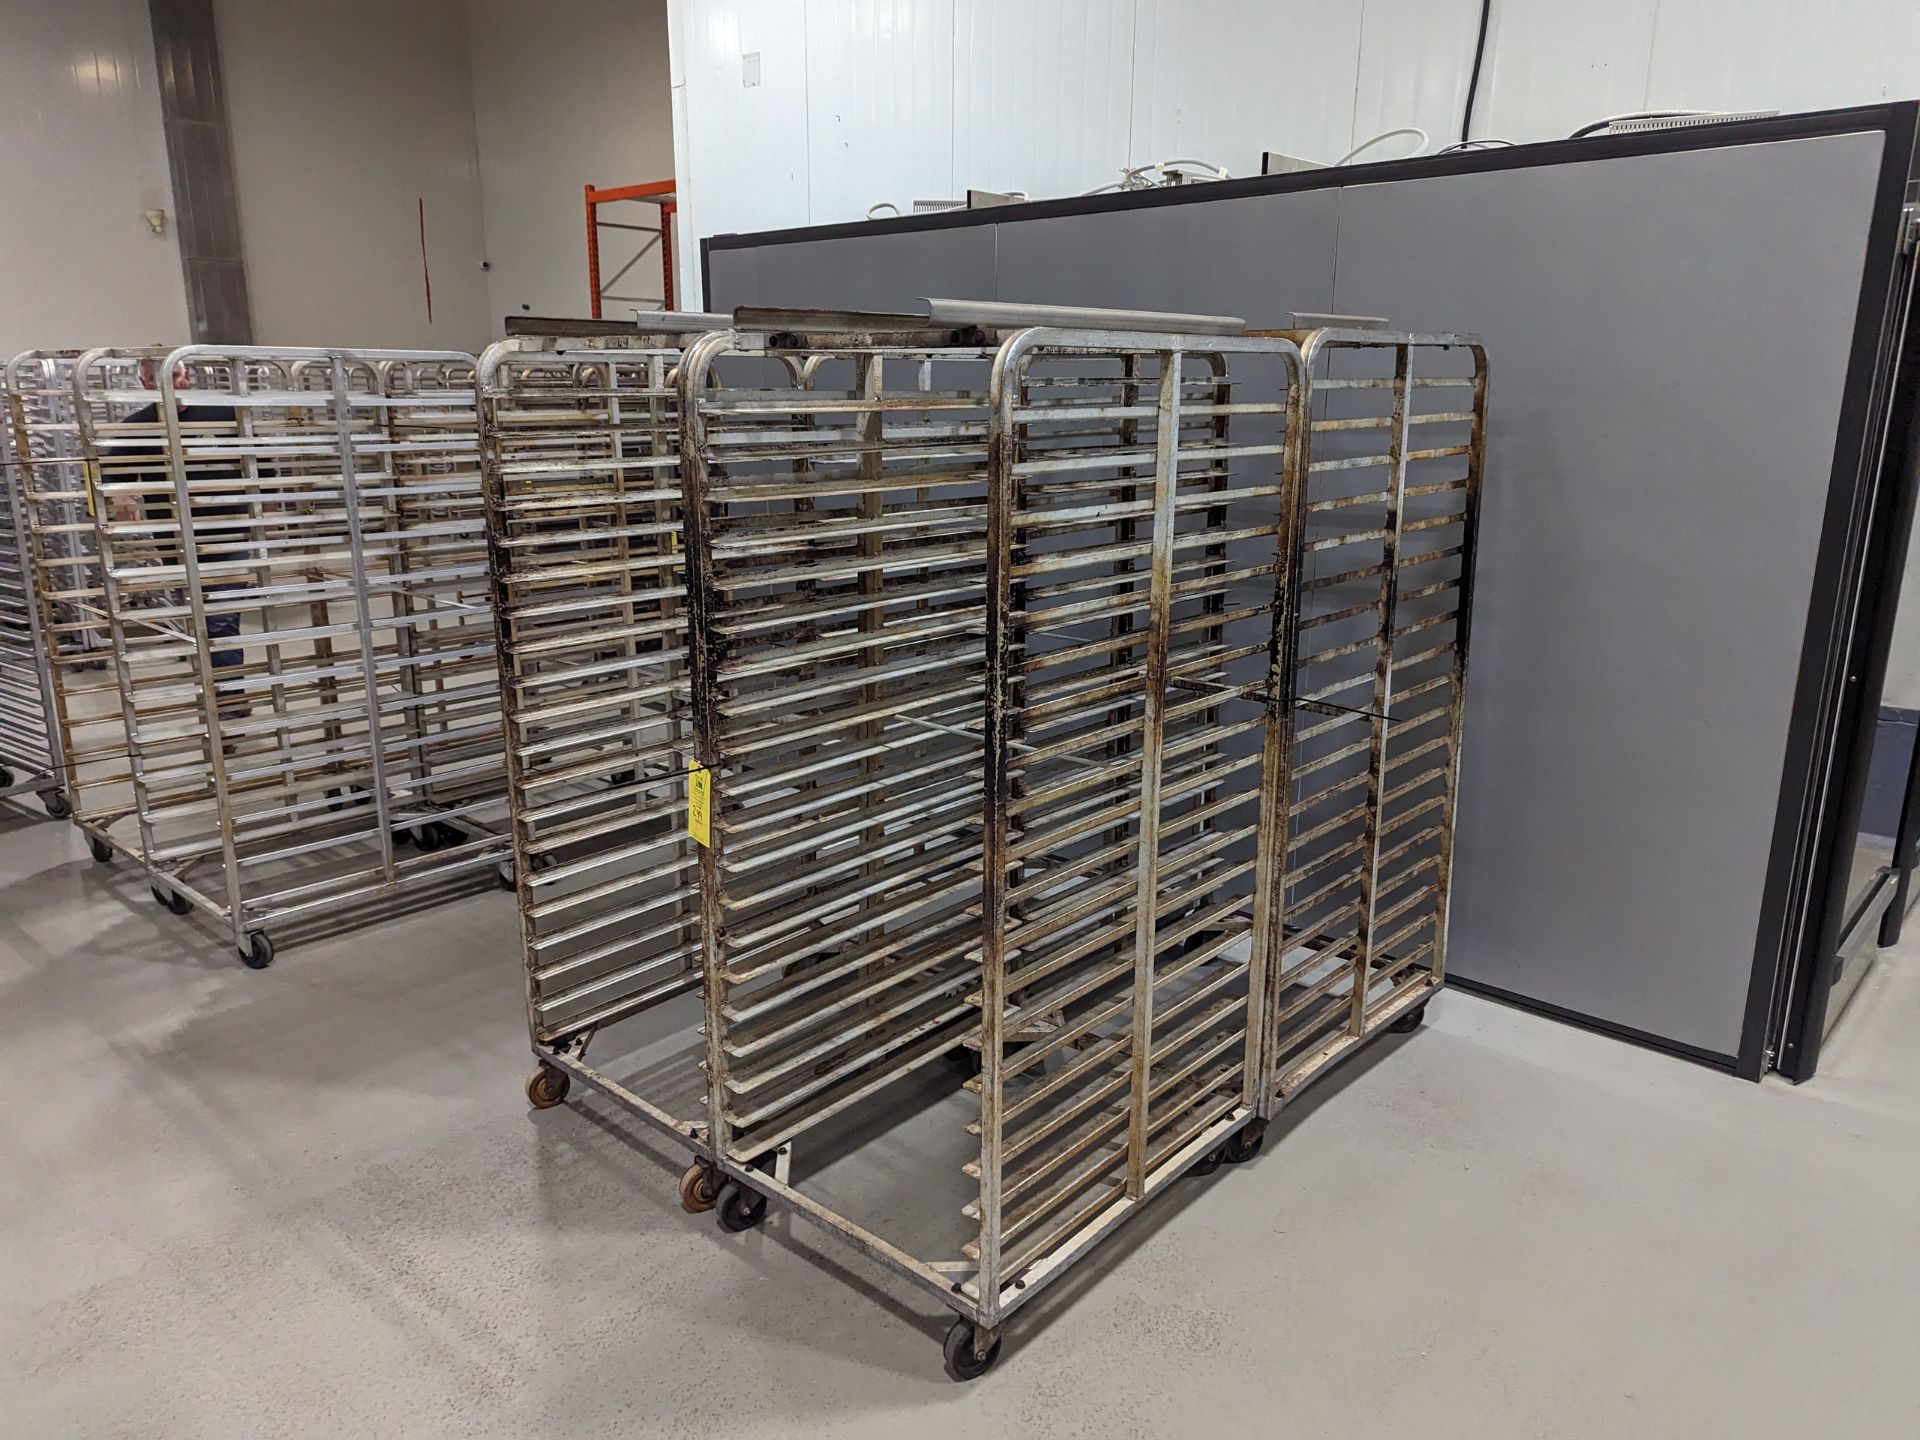 Lot of 4 Double Wide Aluminum Bakery Racks, Dimensions LxWxH: 72x57x69 Measurements are for lot of - Image 3 of 7